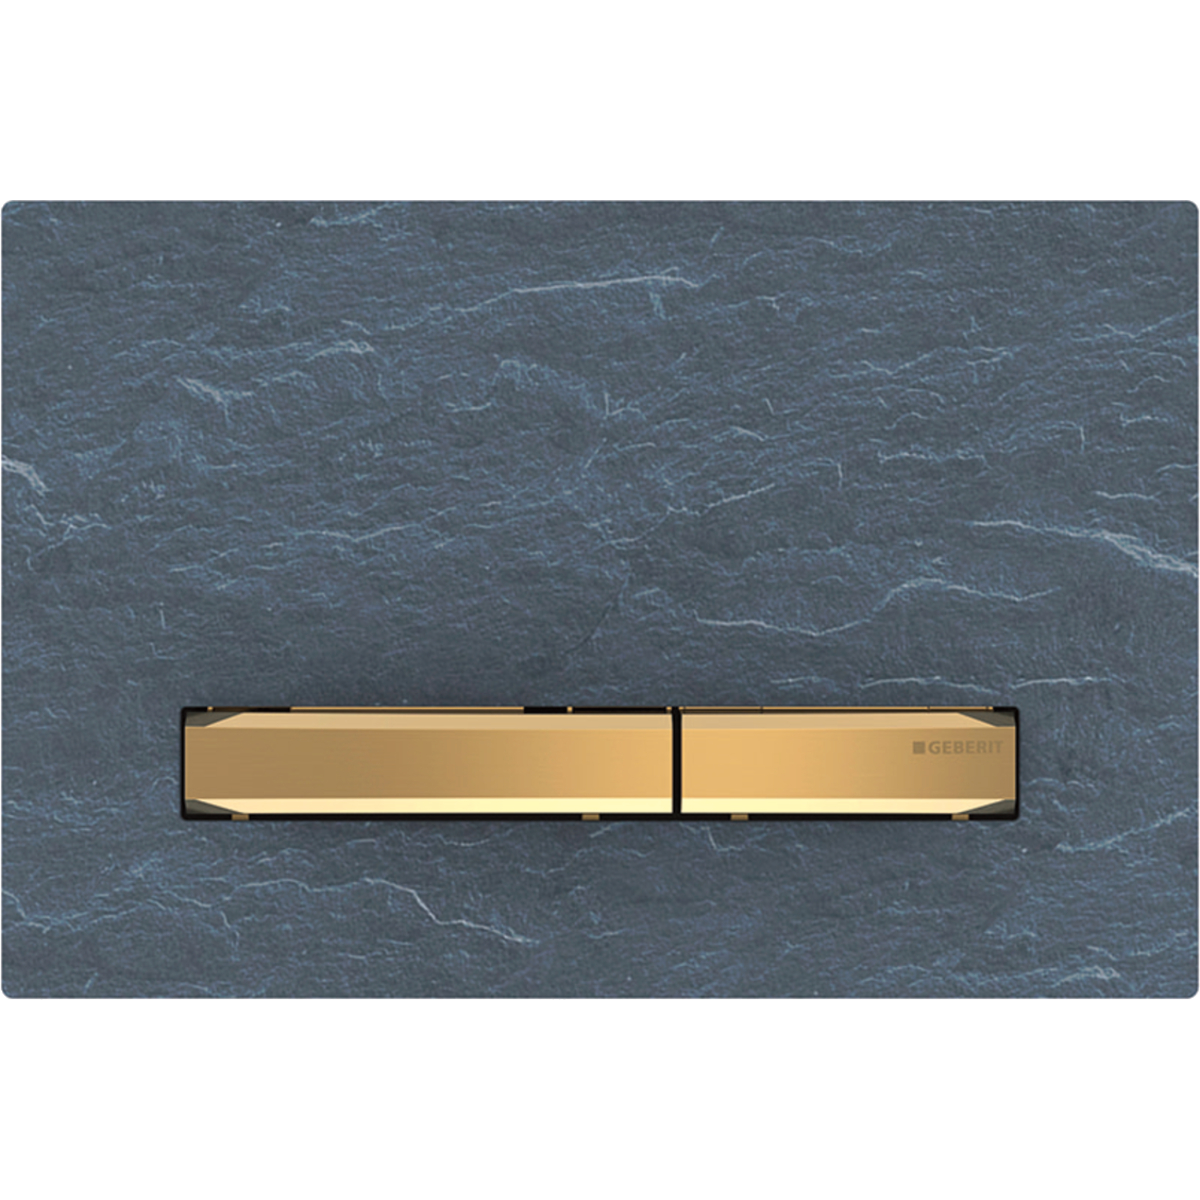 Geberit 115.672.JM.2 Actuator Plate Sigma50 for Dual Flush, Metal Colour Brass - Base Plate and Buttons: Brass/Cover Plate: Mustang Slate